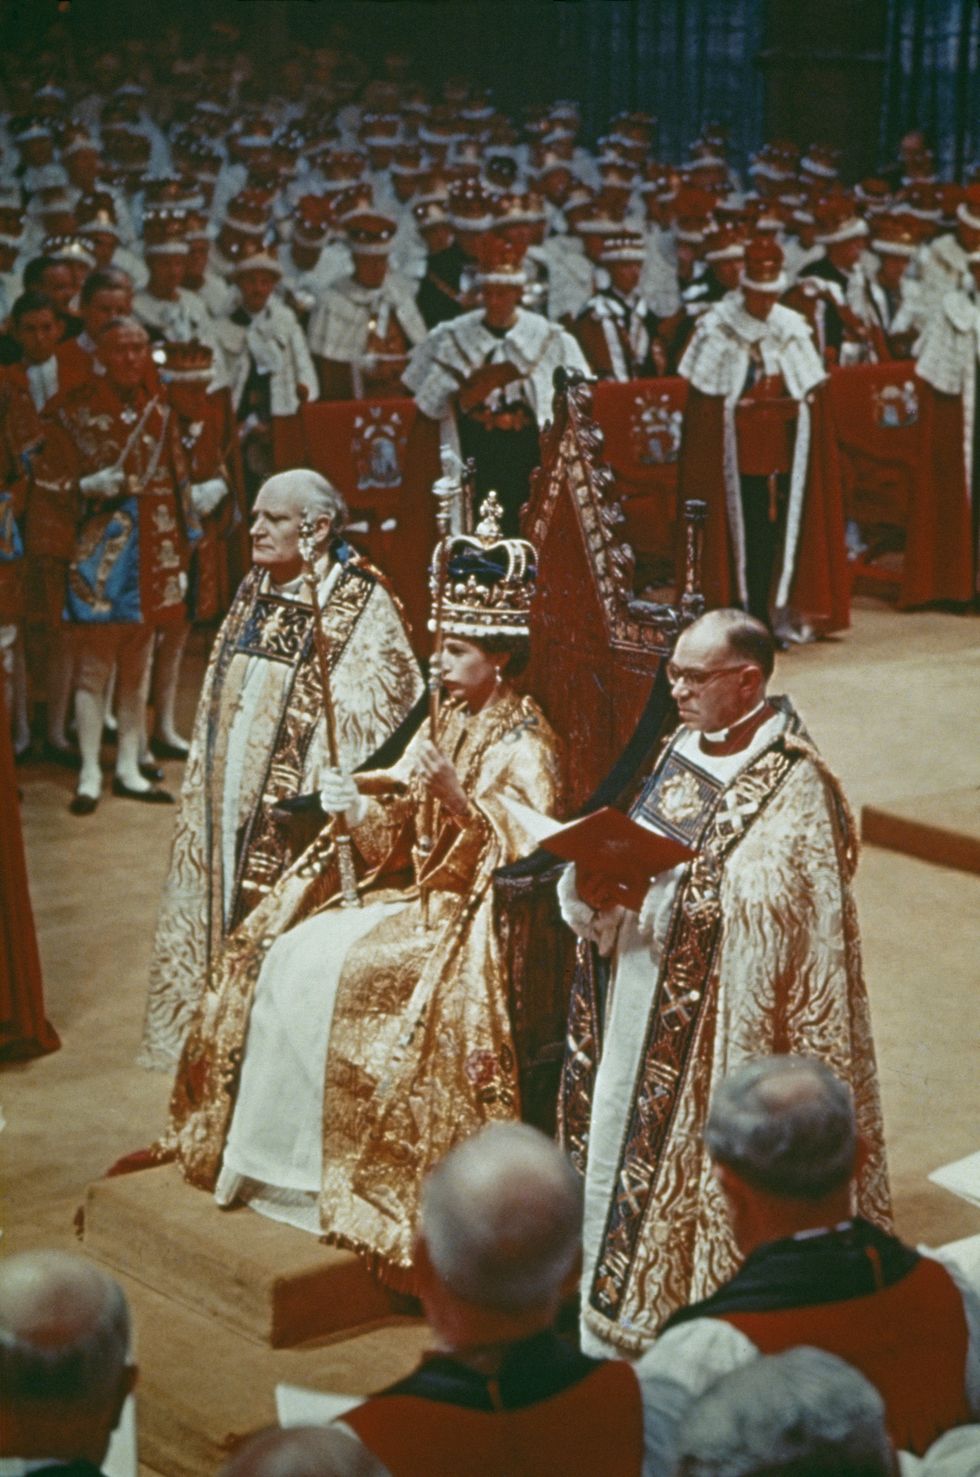 2nd june 1953 queen elizabeth ii at her coronation ceremony in westminster abbey, london photo by hulton archivegetty images